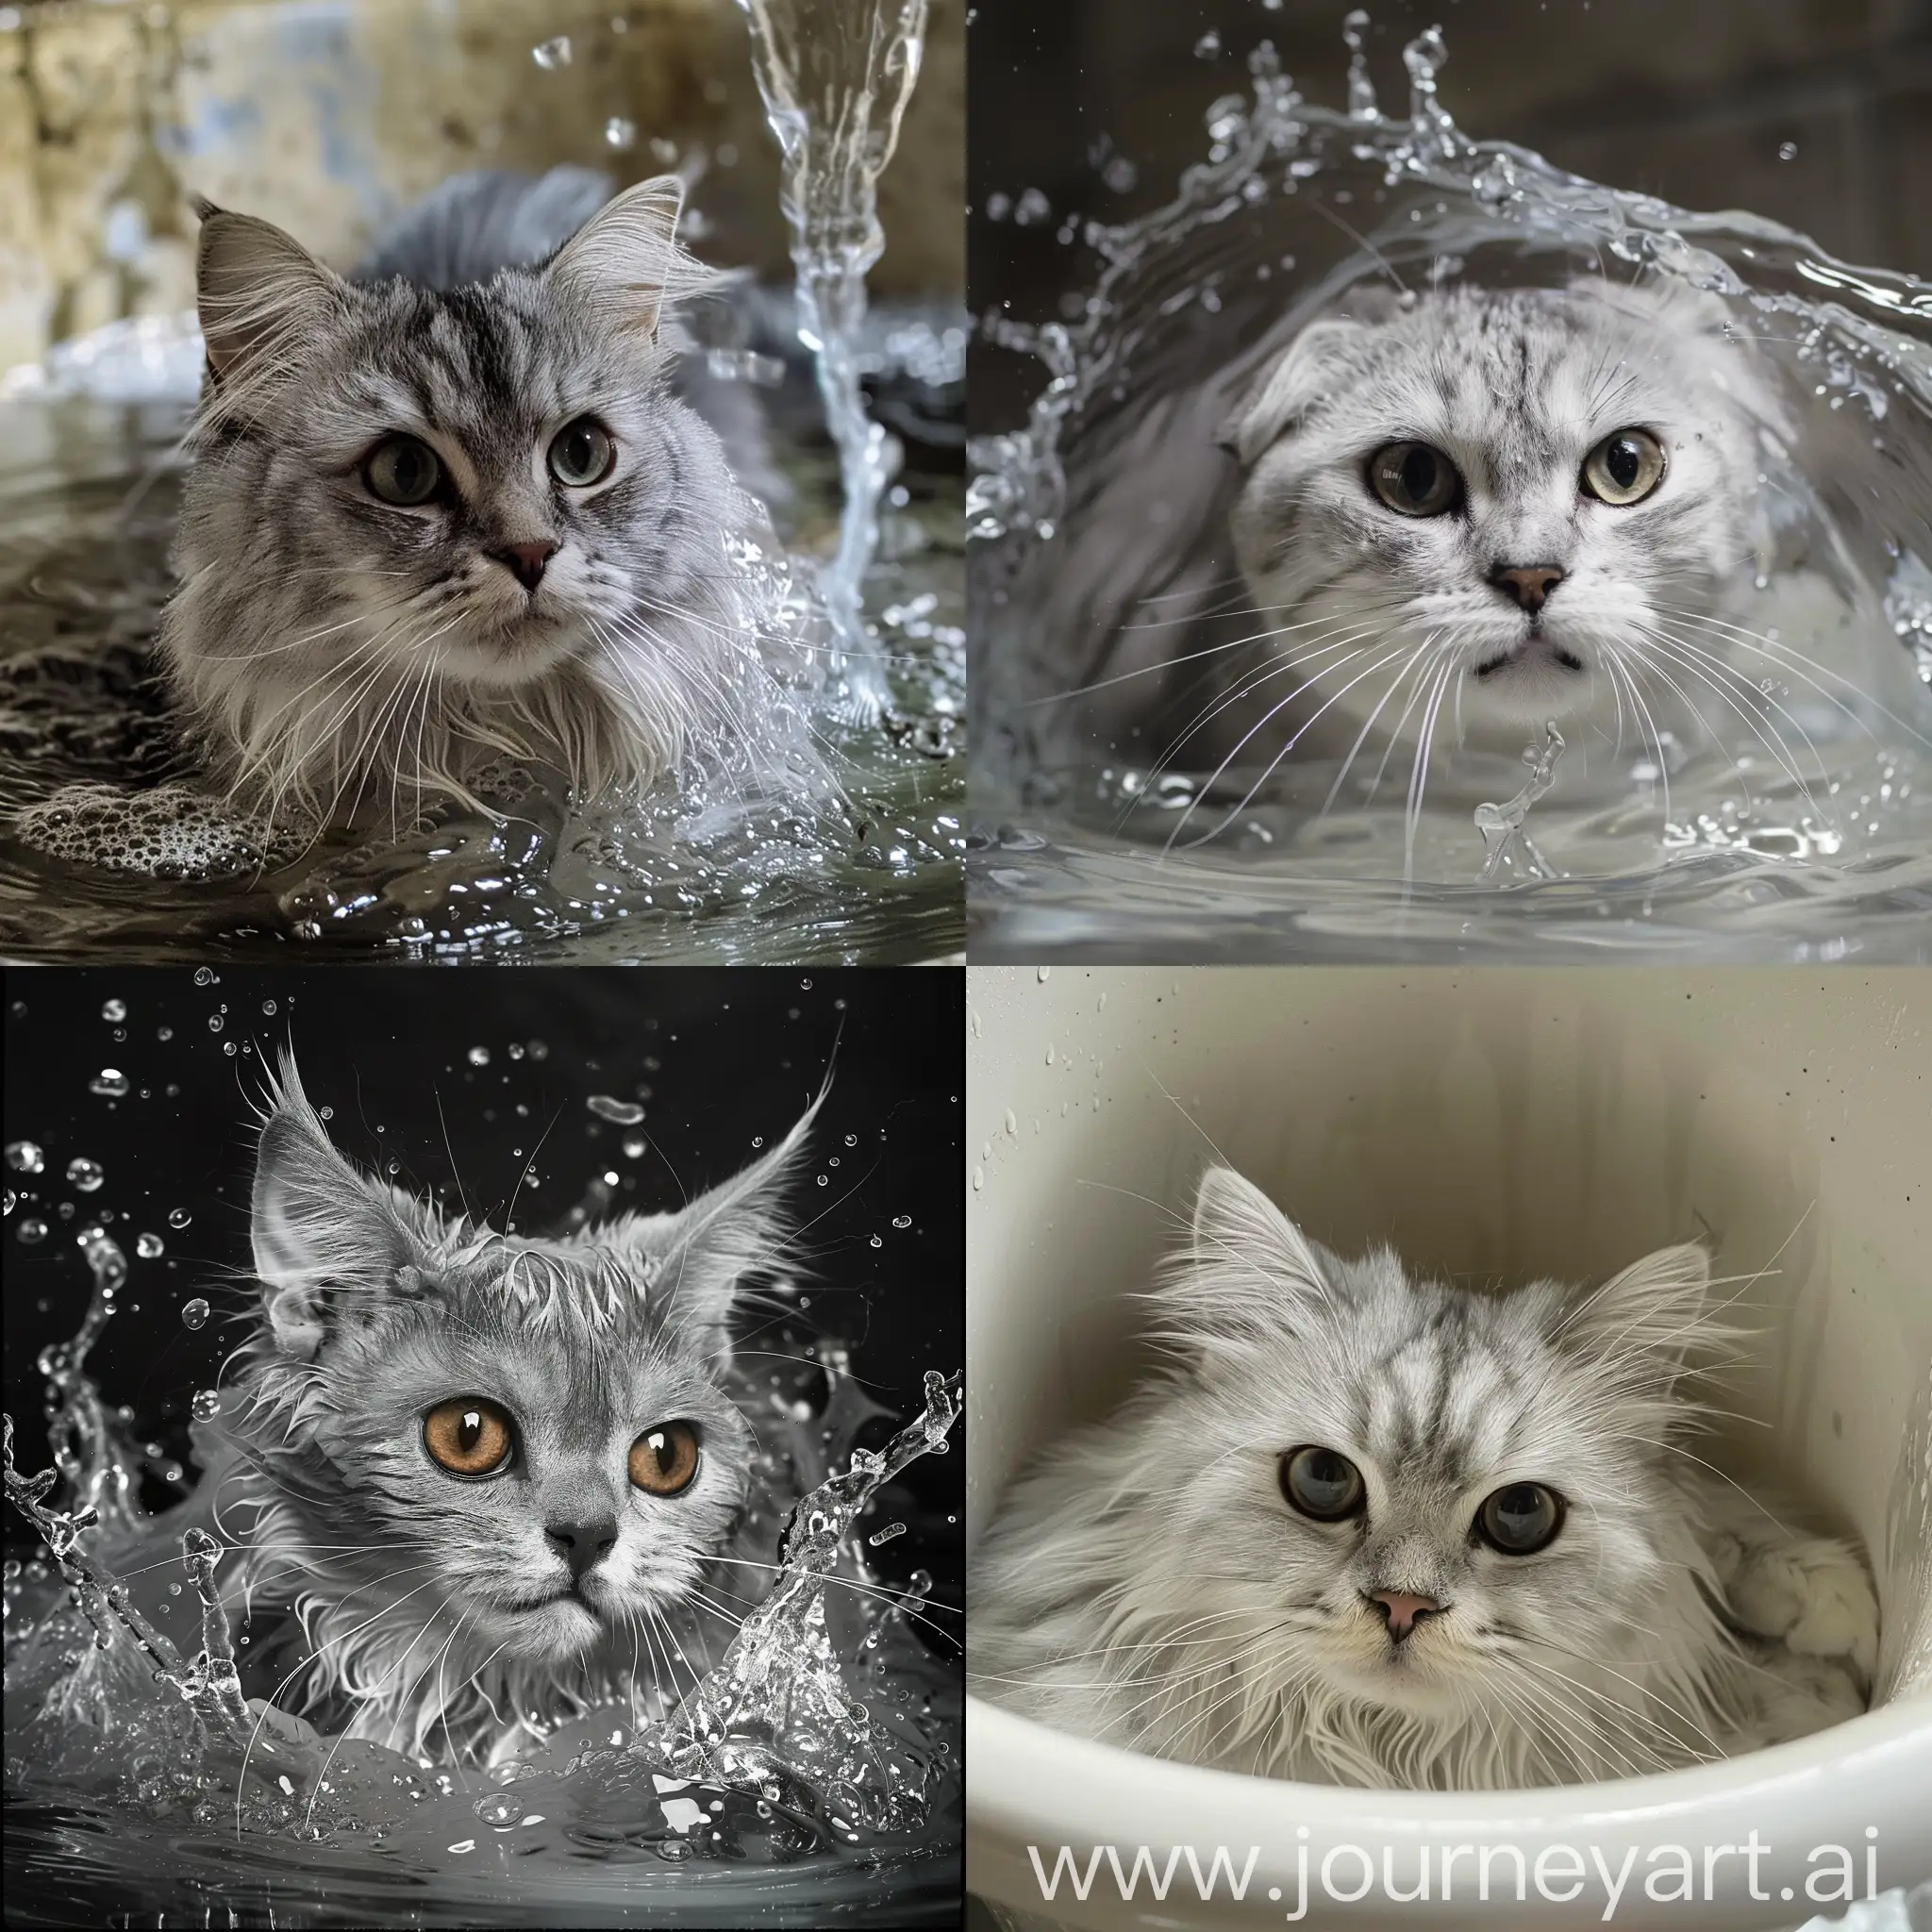 The two-year-old silver shaded cat is dunking.